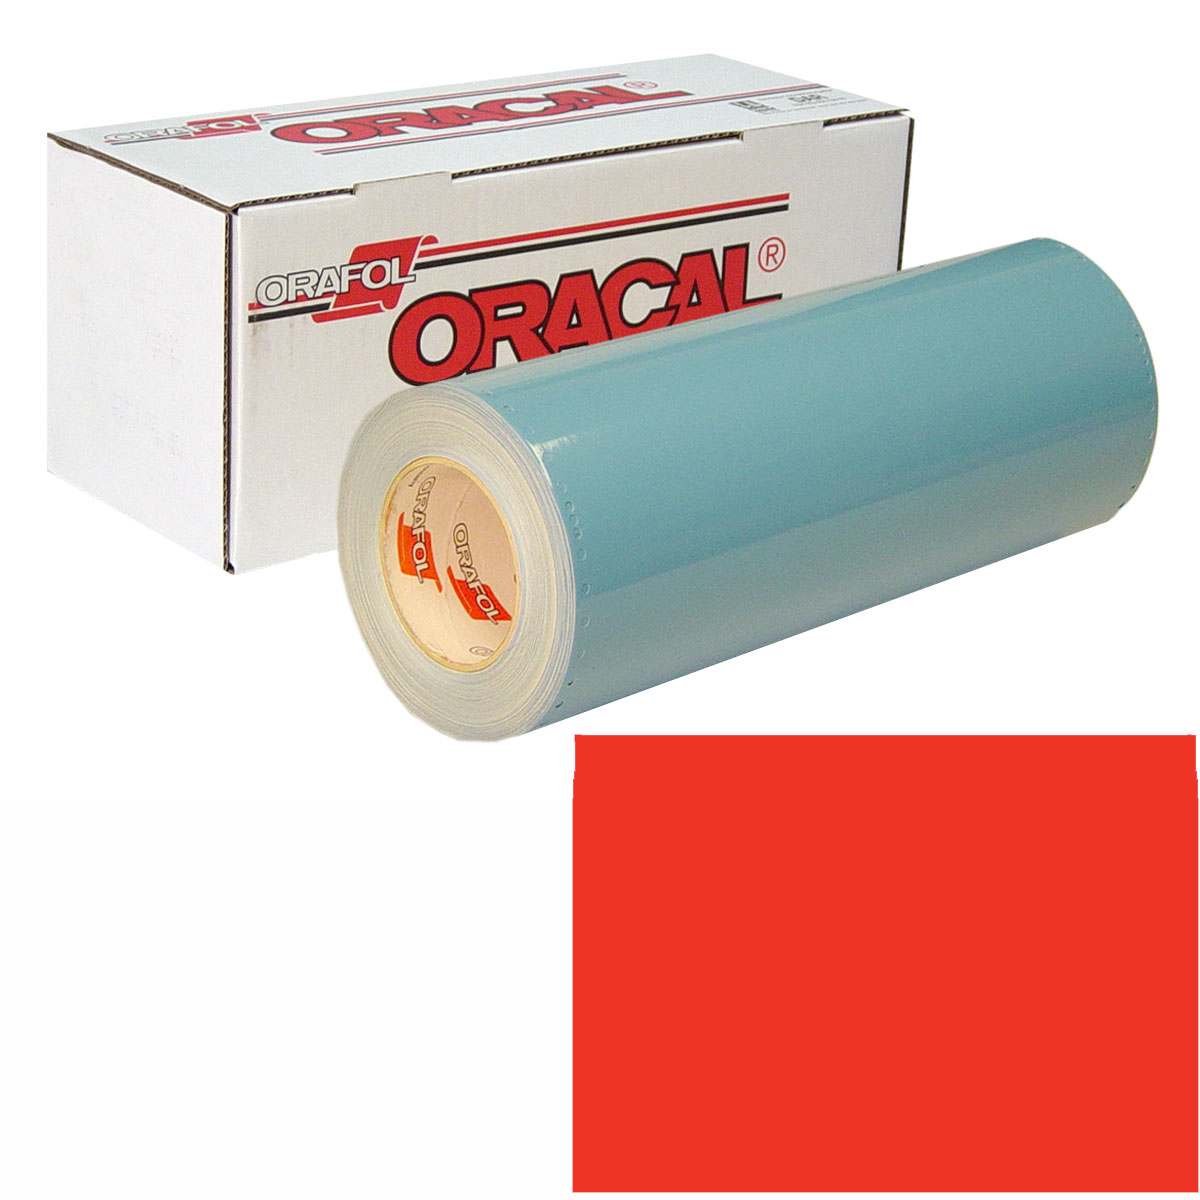 ORACAL 751RA 24in X 50yd 028 Cardinal Red